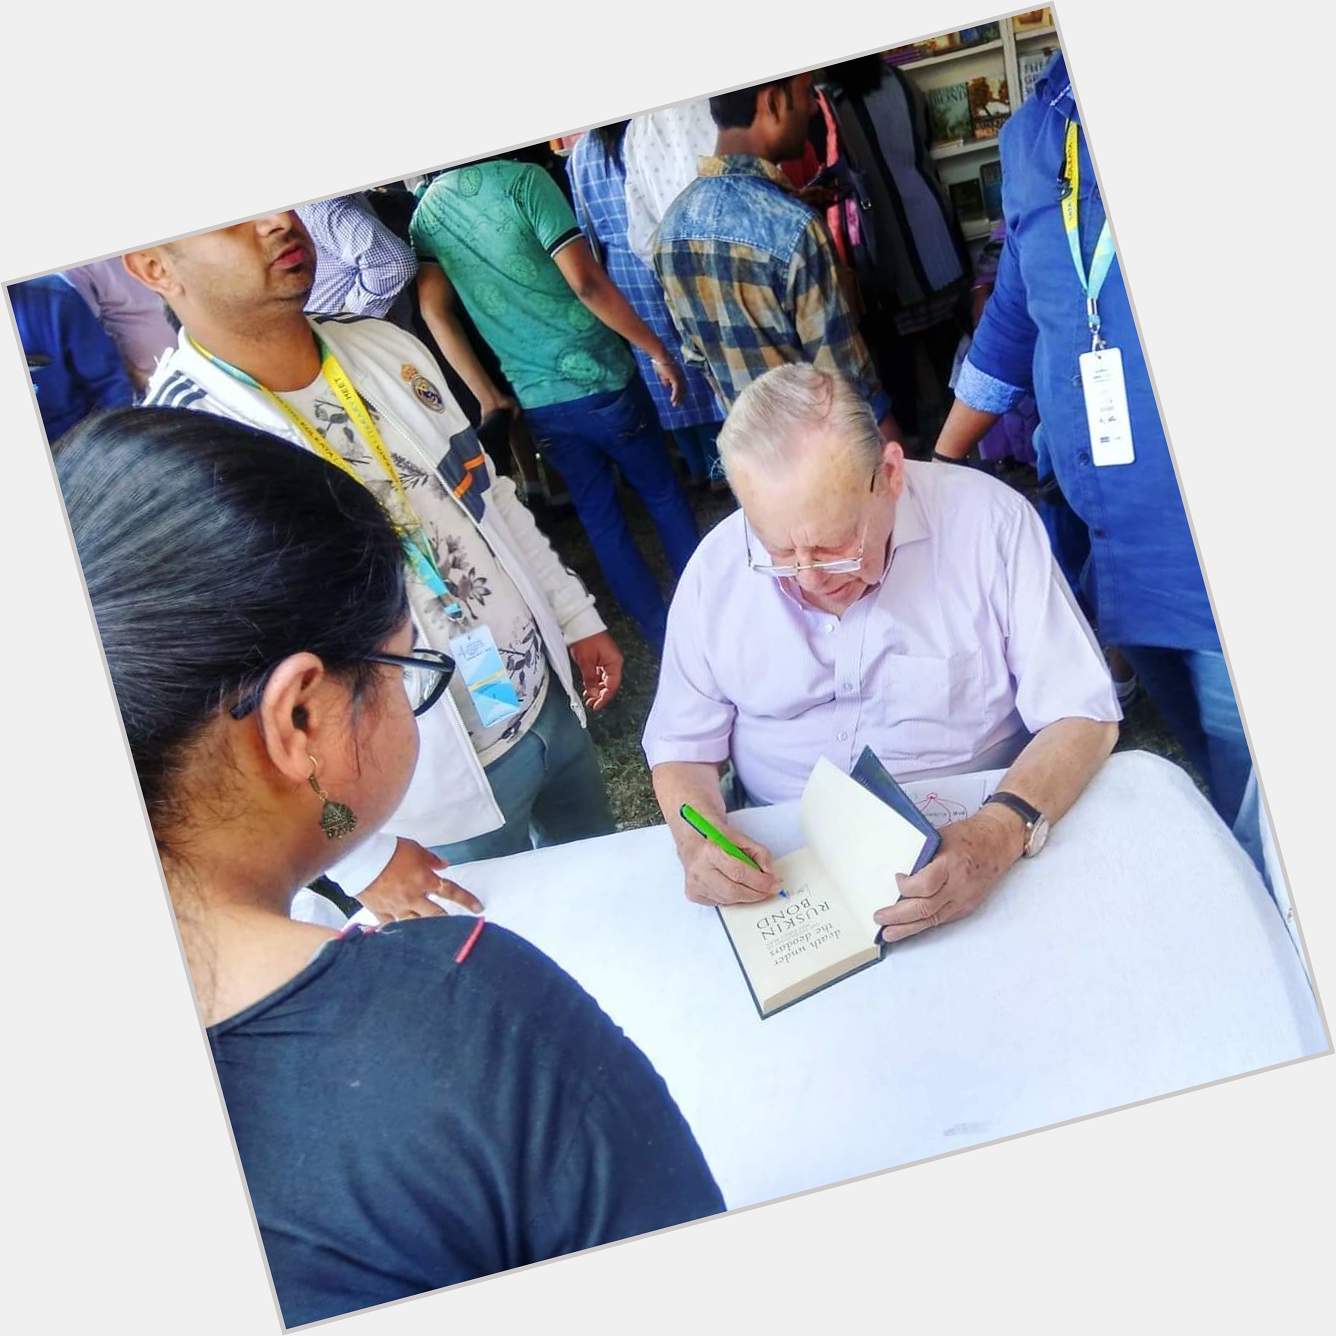  Happy Birthday Ruskin Bond Sir
My all time favorite writer   Long live and Prosper  